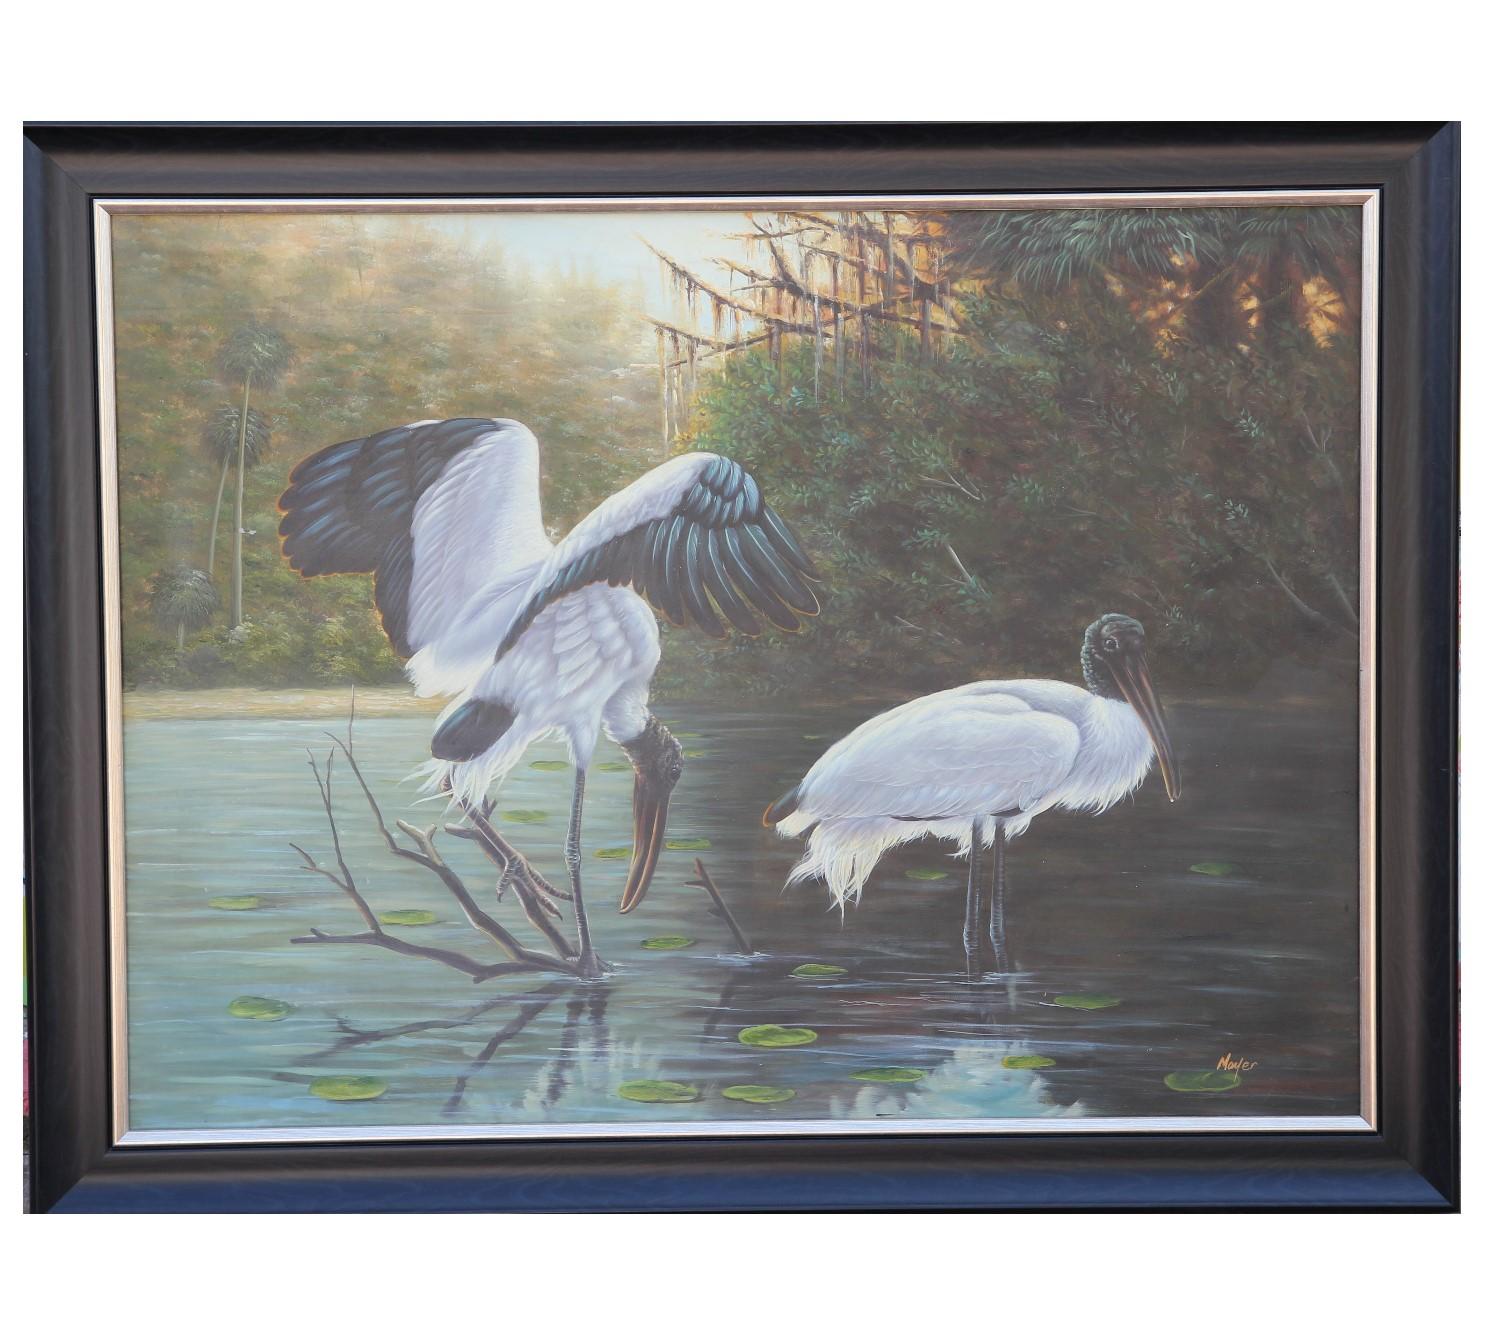 Mayer Animal Painting - Naturalistic Lake Landscape with Cranes 